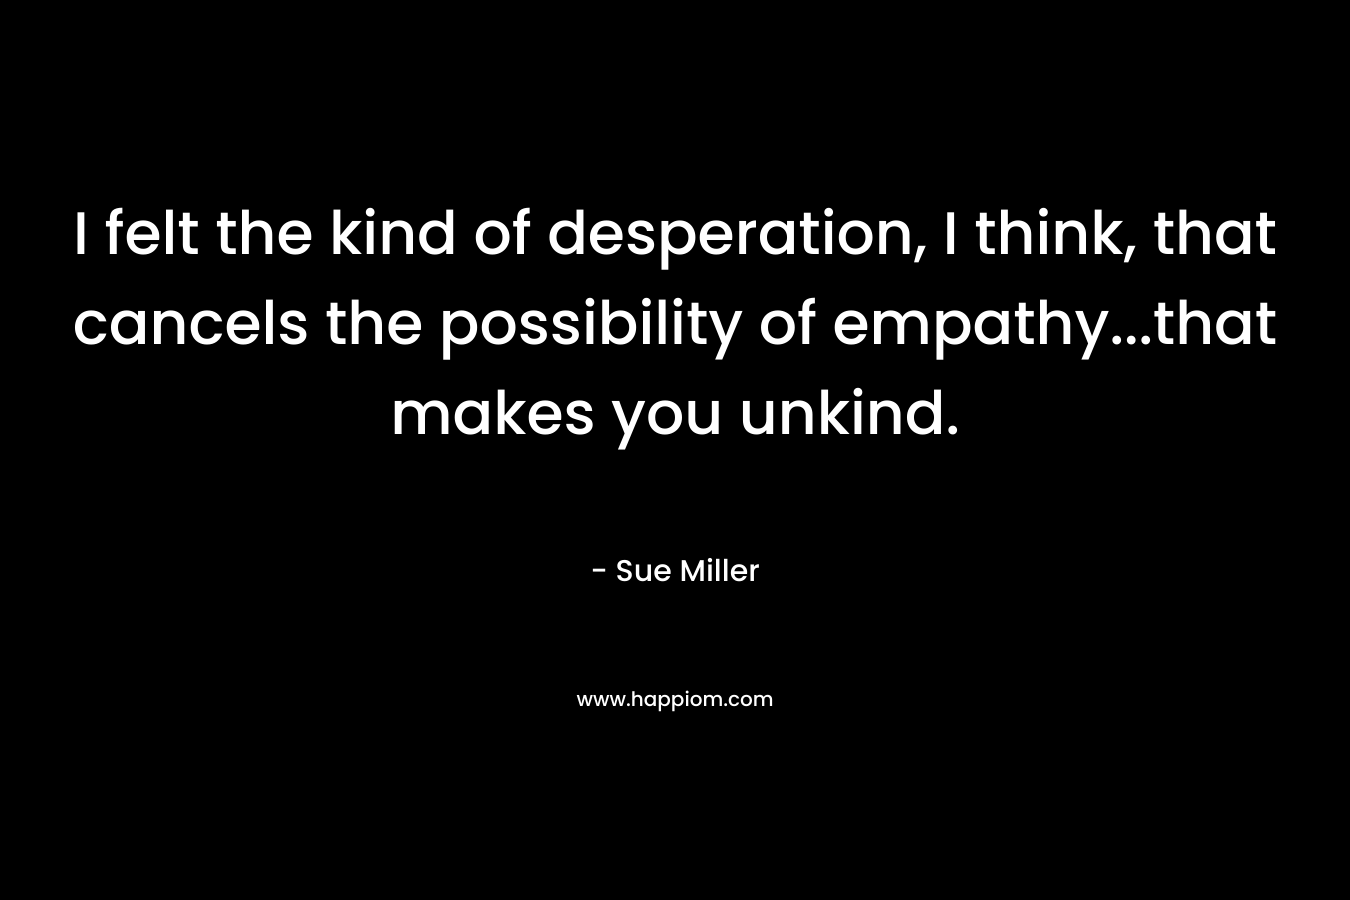 I felt the kind of desperation, I think, that cancels the possibility of empathy...that makes you unkind.